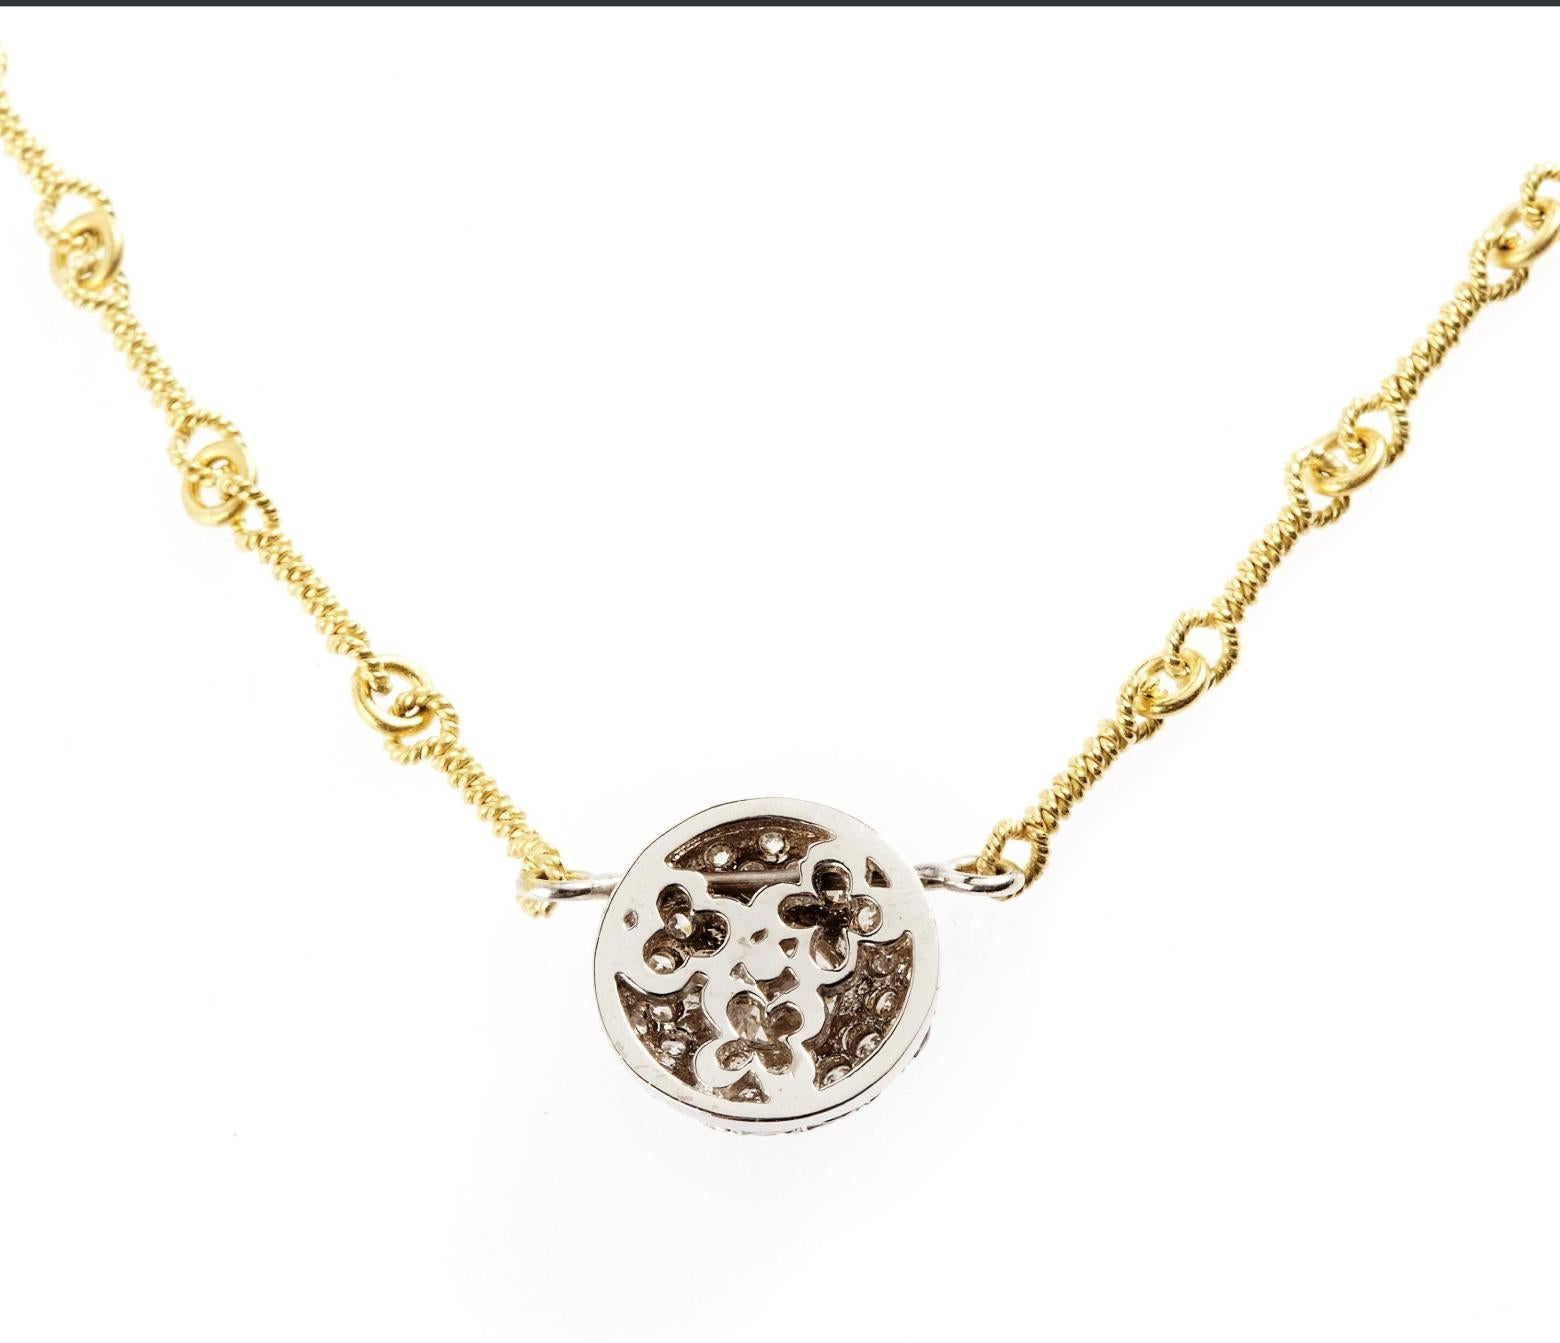 IF YOU ARE REALLY INTERESTED, CONTACT US WITH ANY REASONABLE OFFER. WE WILL TRY OUR BEST TO MAKE YOU HAPPY!

18K Yellow White Two-Tone Gold and Diamond Round Pendant Chain Necklace

Handmade chain is used which is done entirely by gold twisted wires